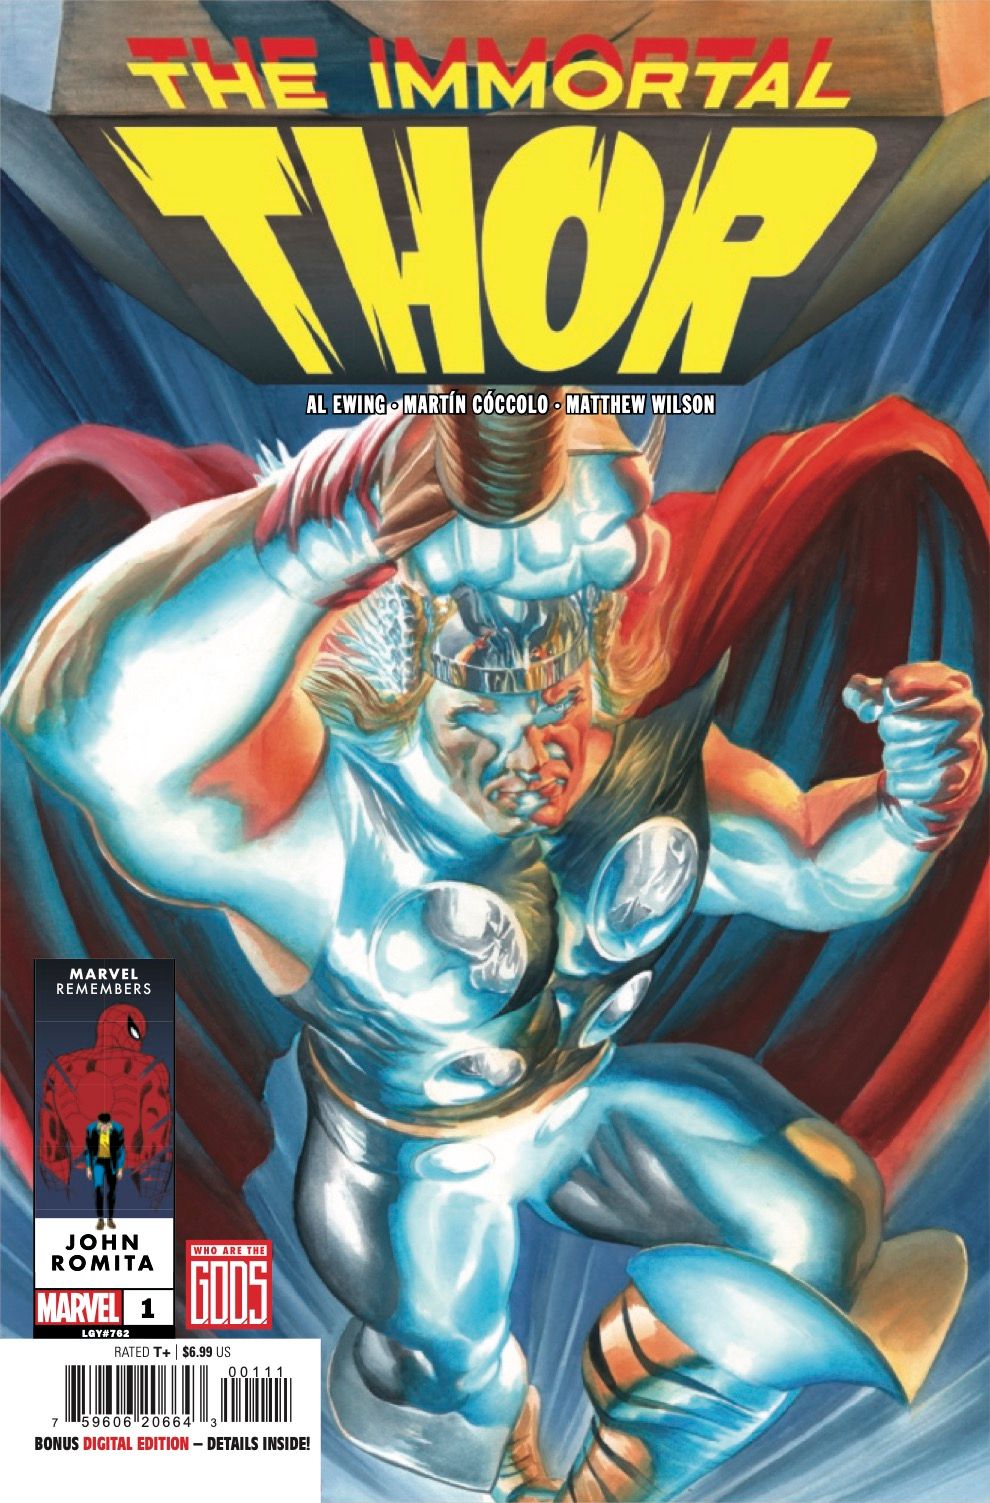 IMMORTALTHOR2023001_ReviewCopy